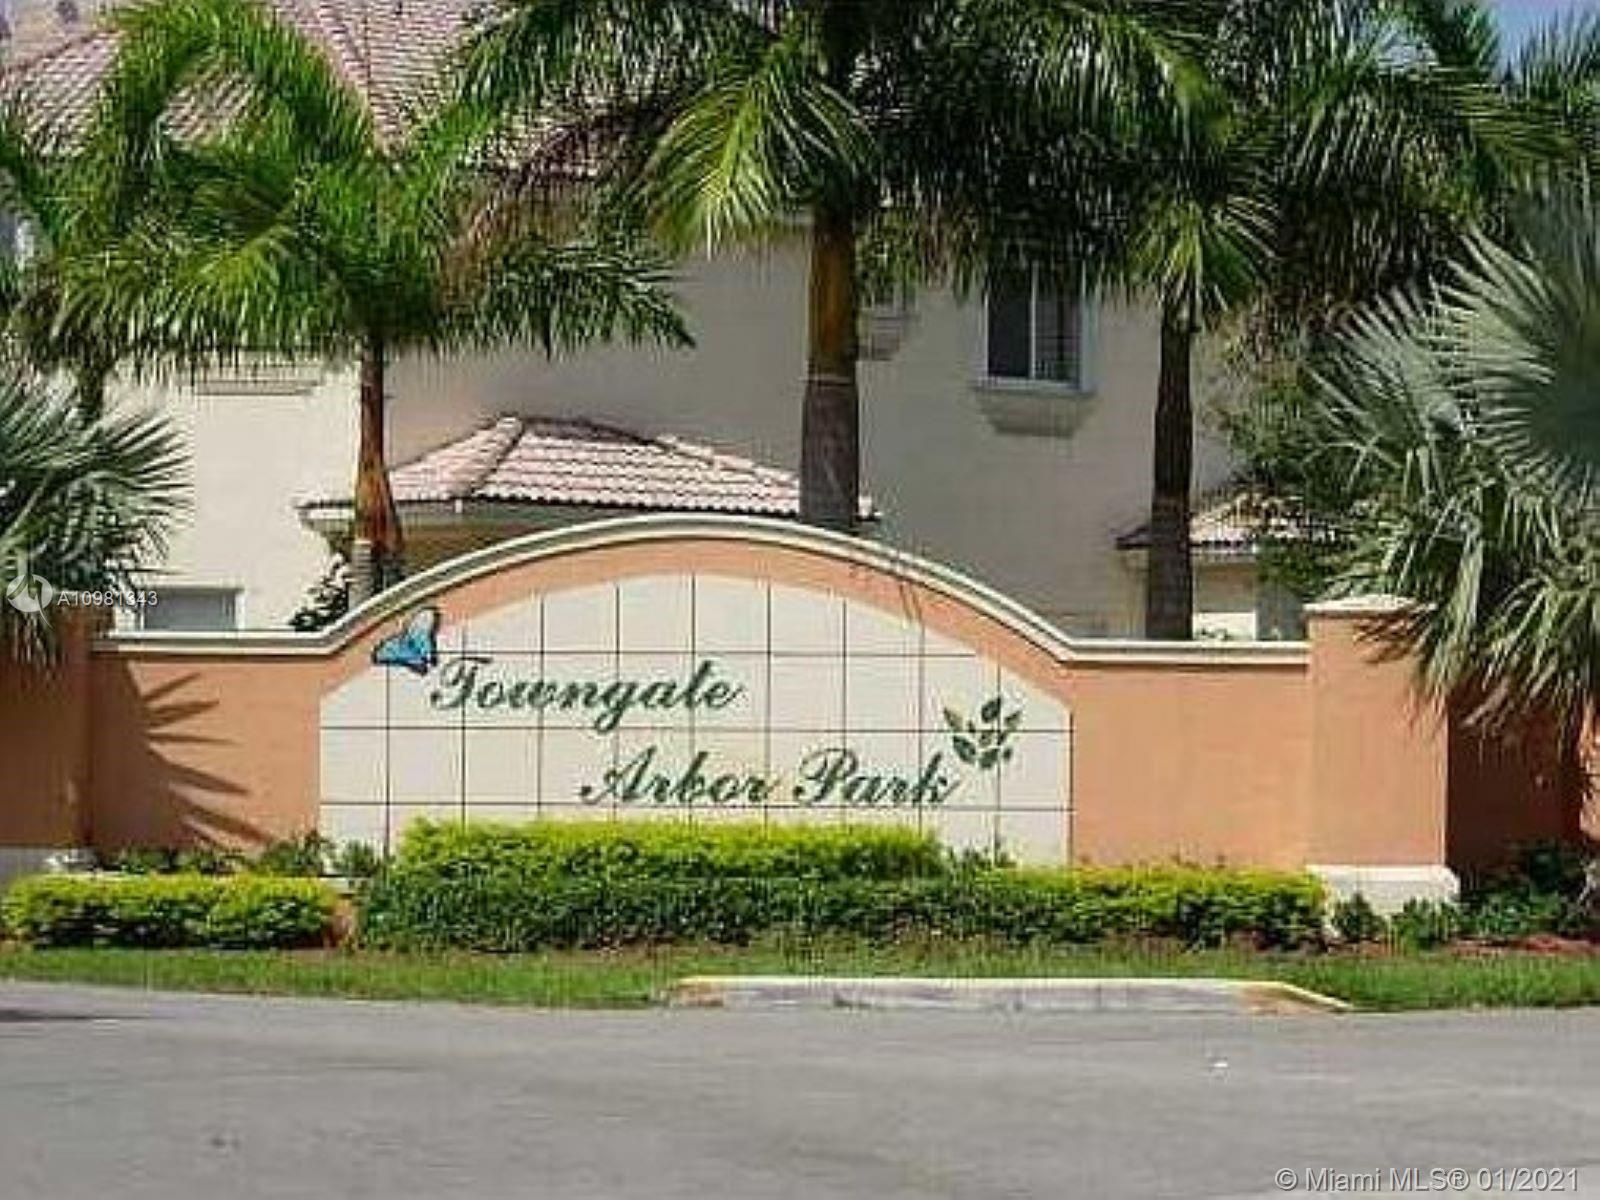 Sought after Community of Towngate Arbor Park in Keys Gate